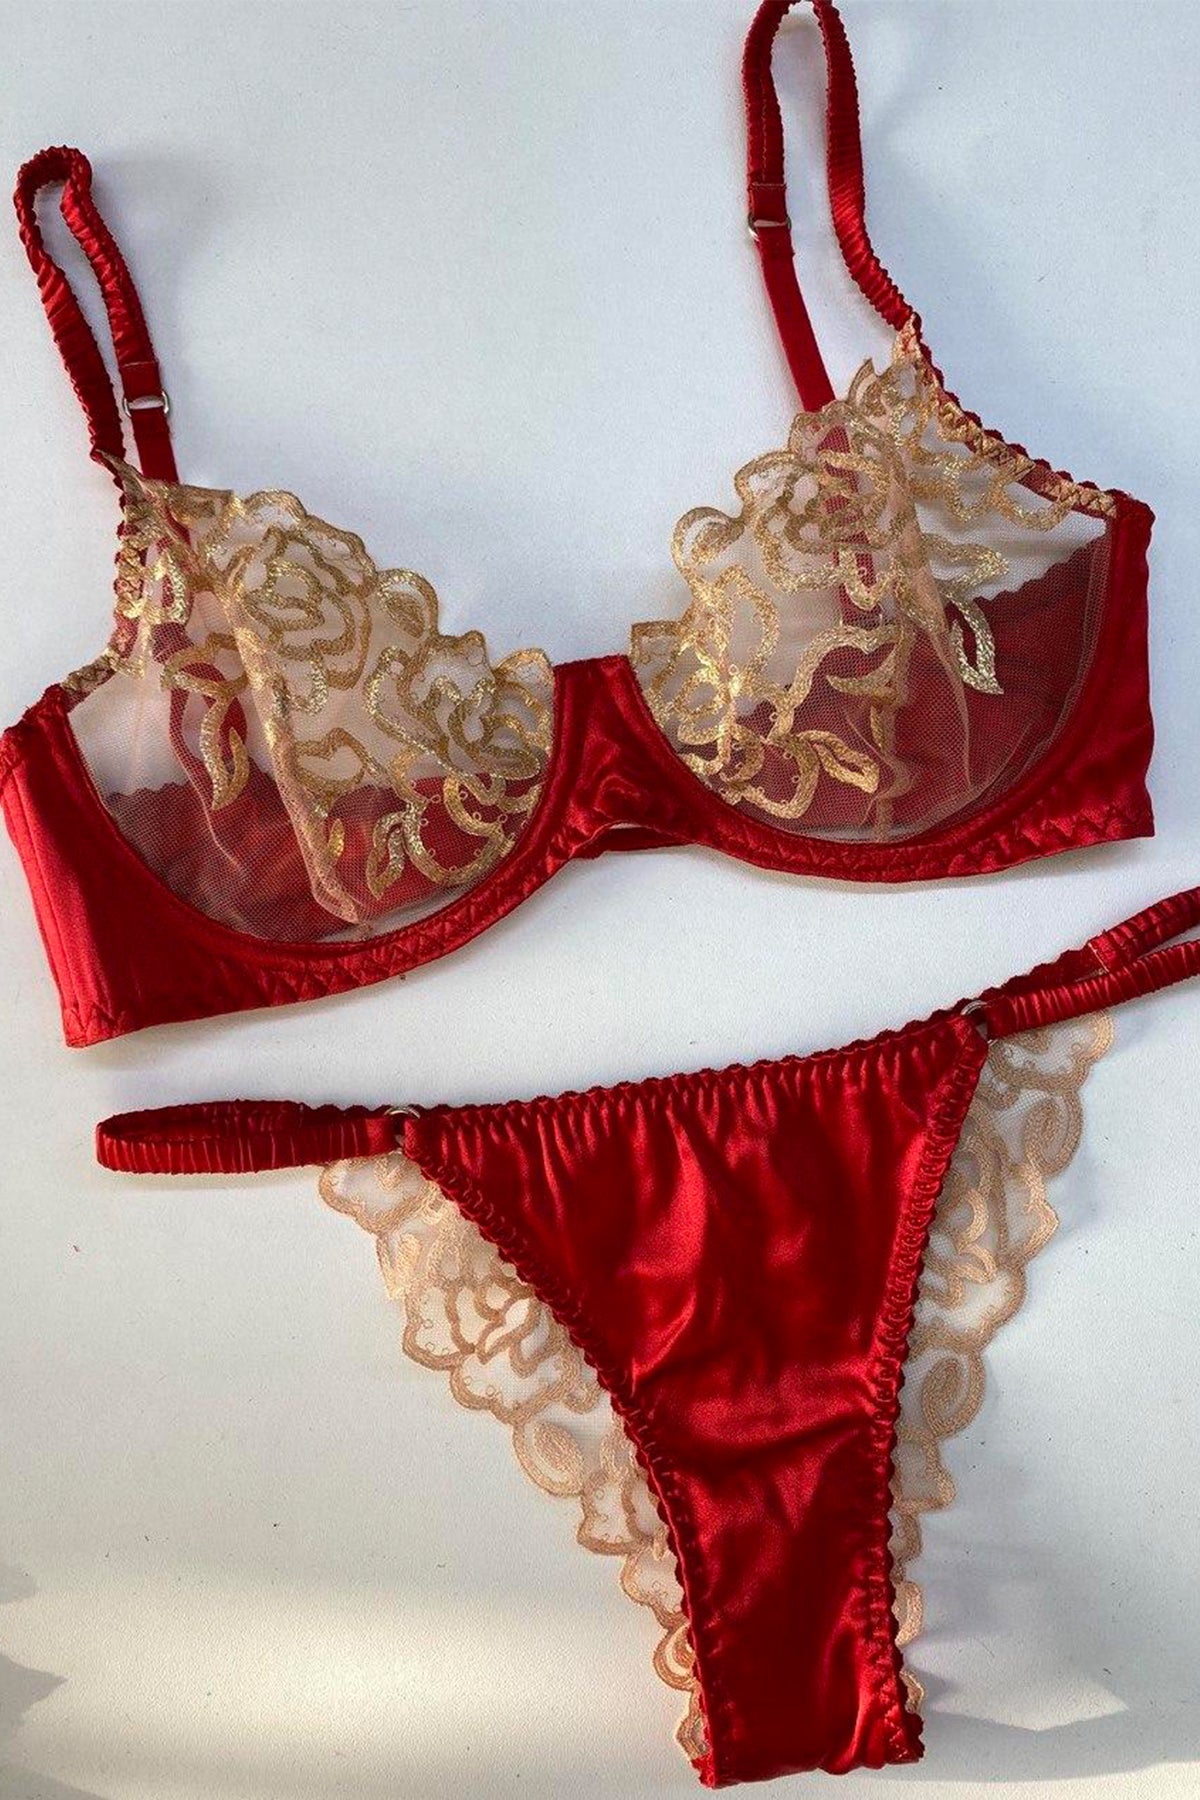 Red silk panties - Red lace panties - Lace brief- Red lingerie